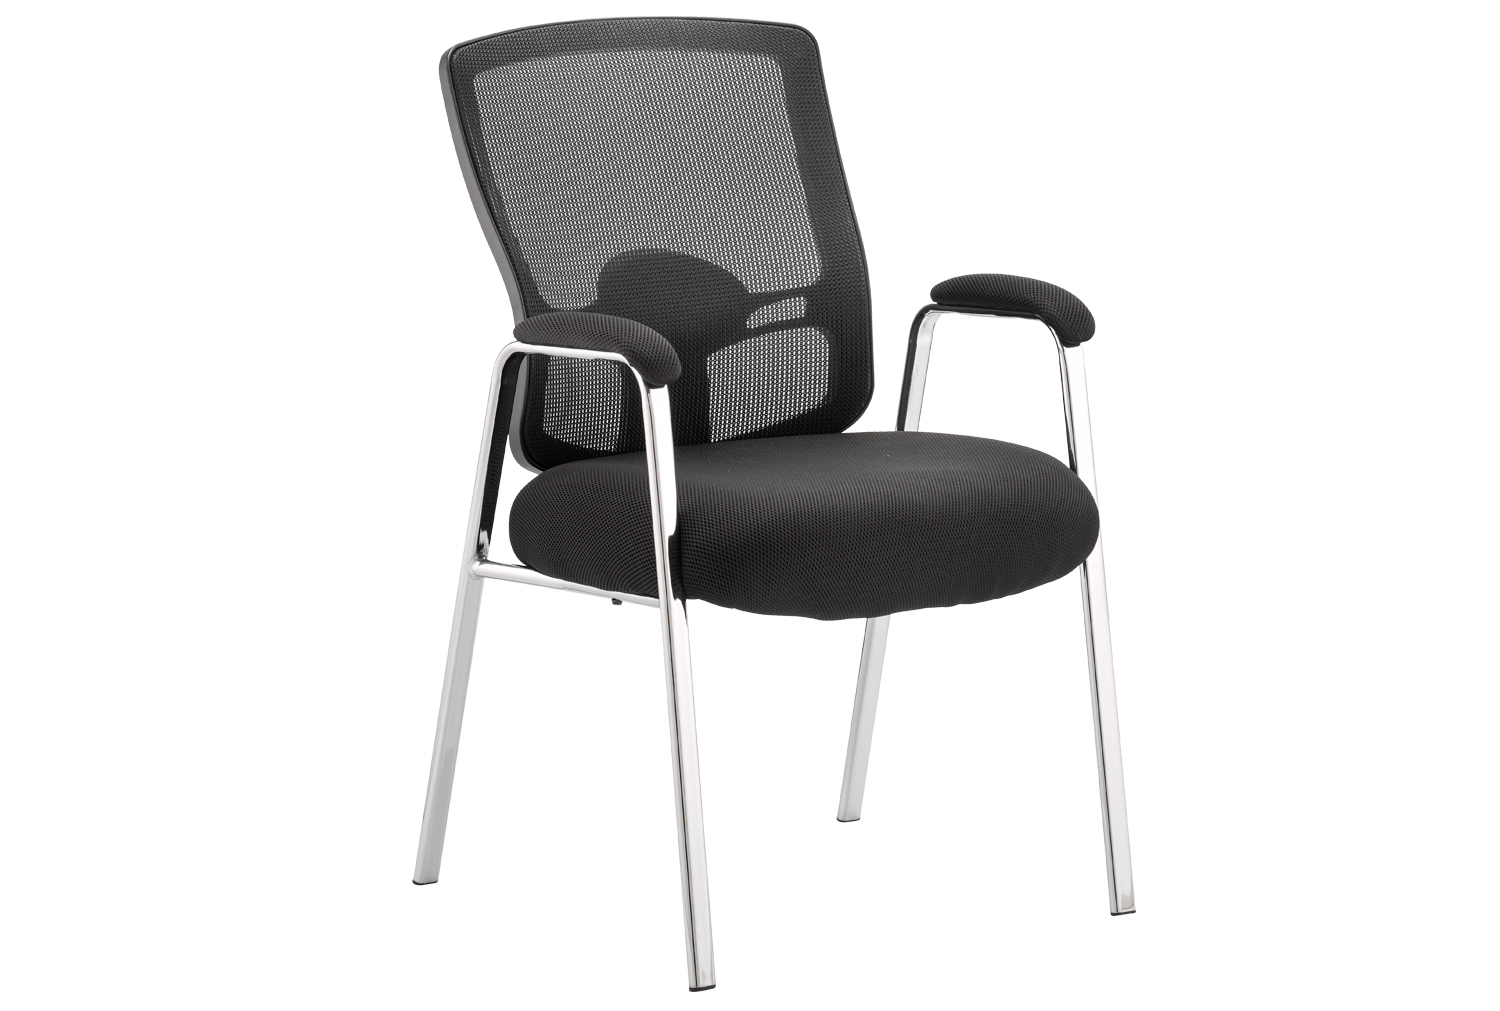 Belarus Mesh Back Meeting Room Office Chair, Black, Express Delivery